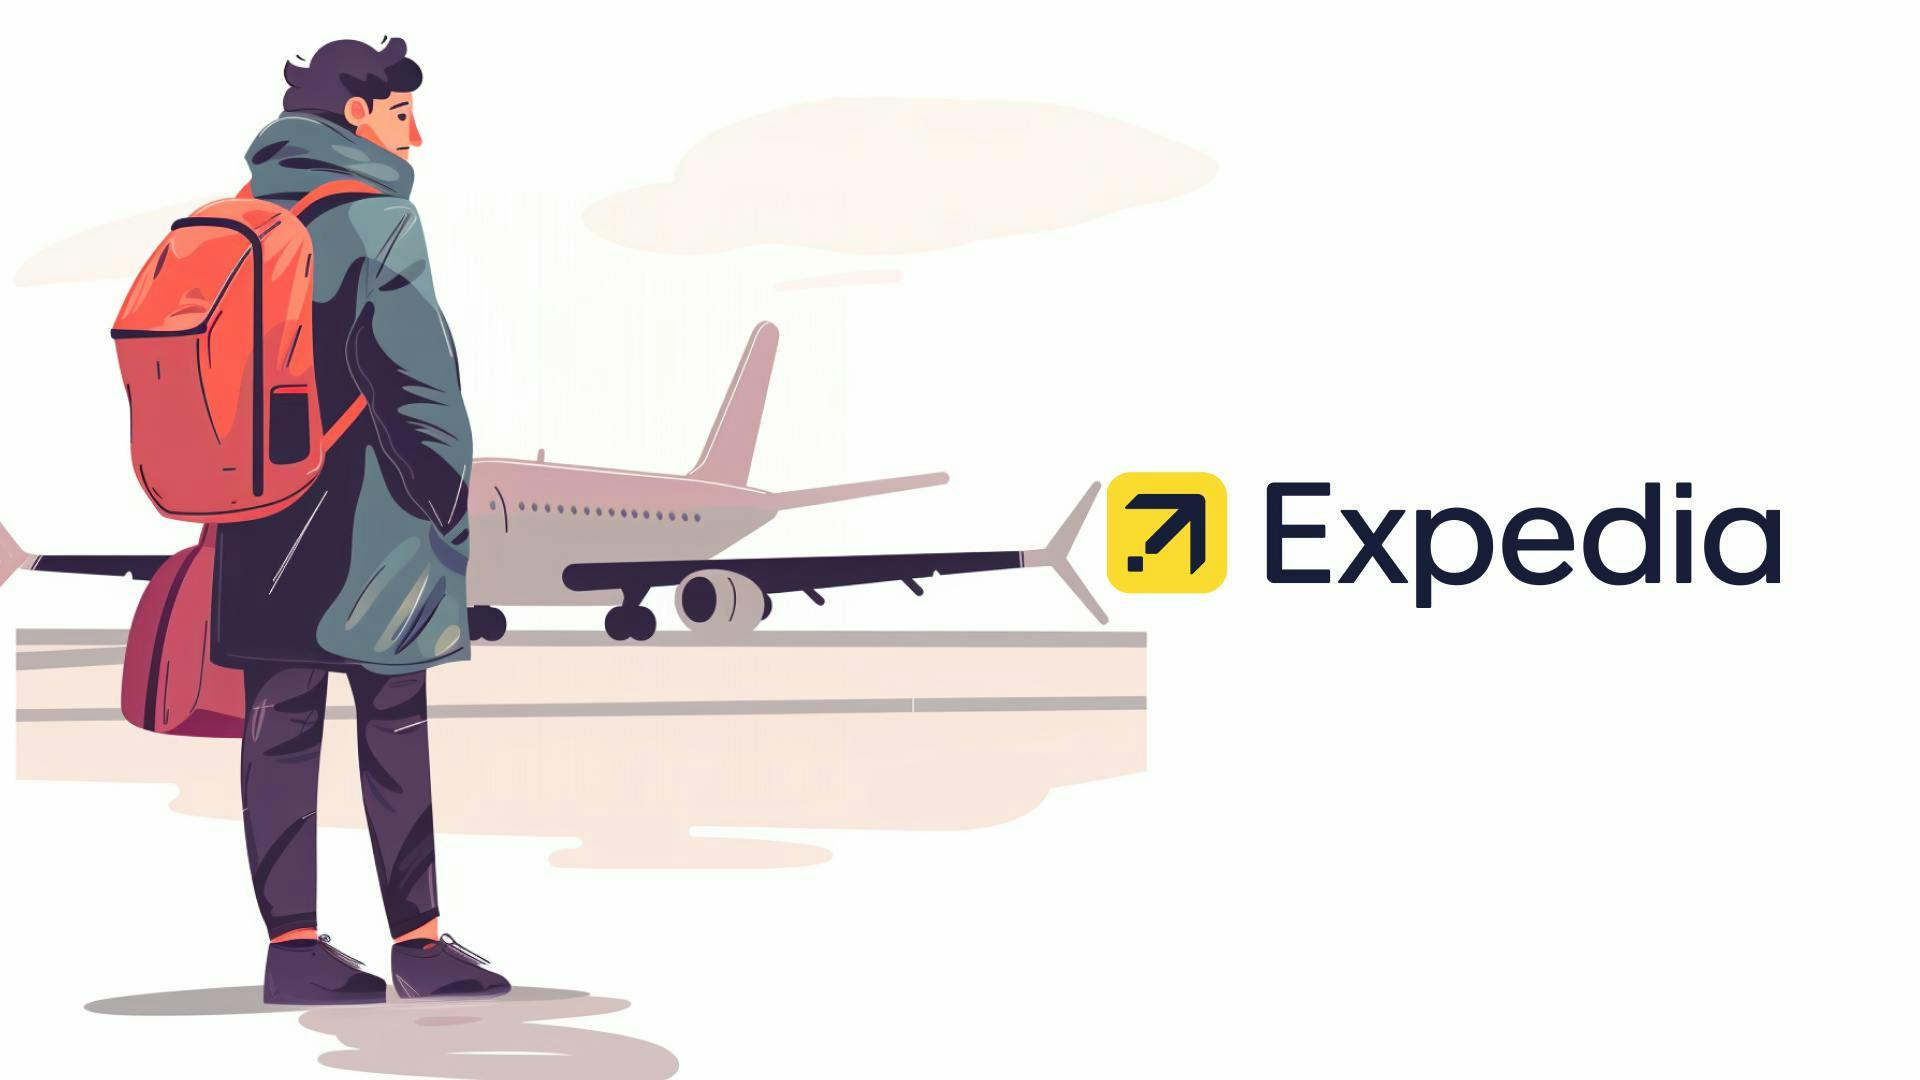 Expedia Lets Go Of 9% of Workforce